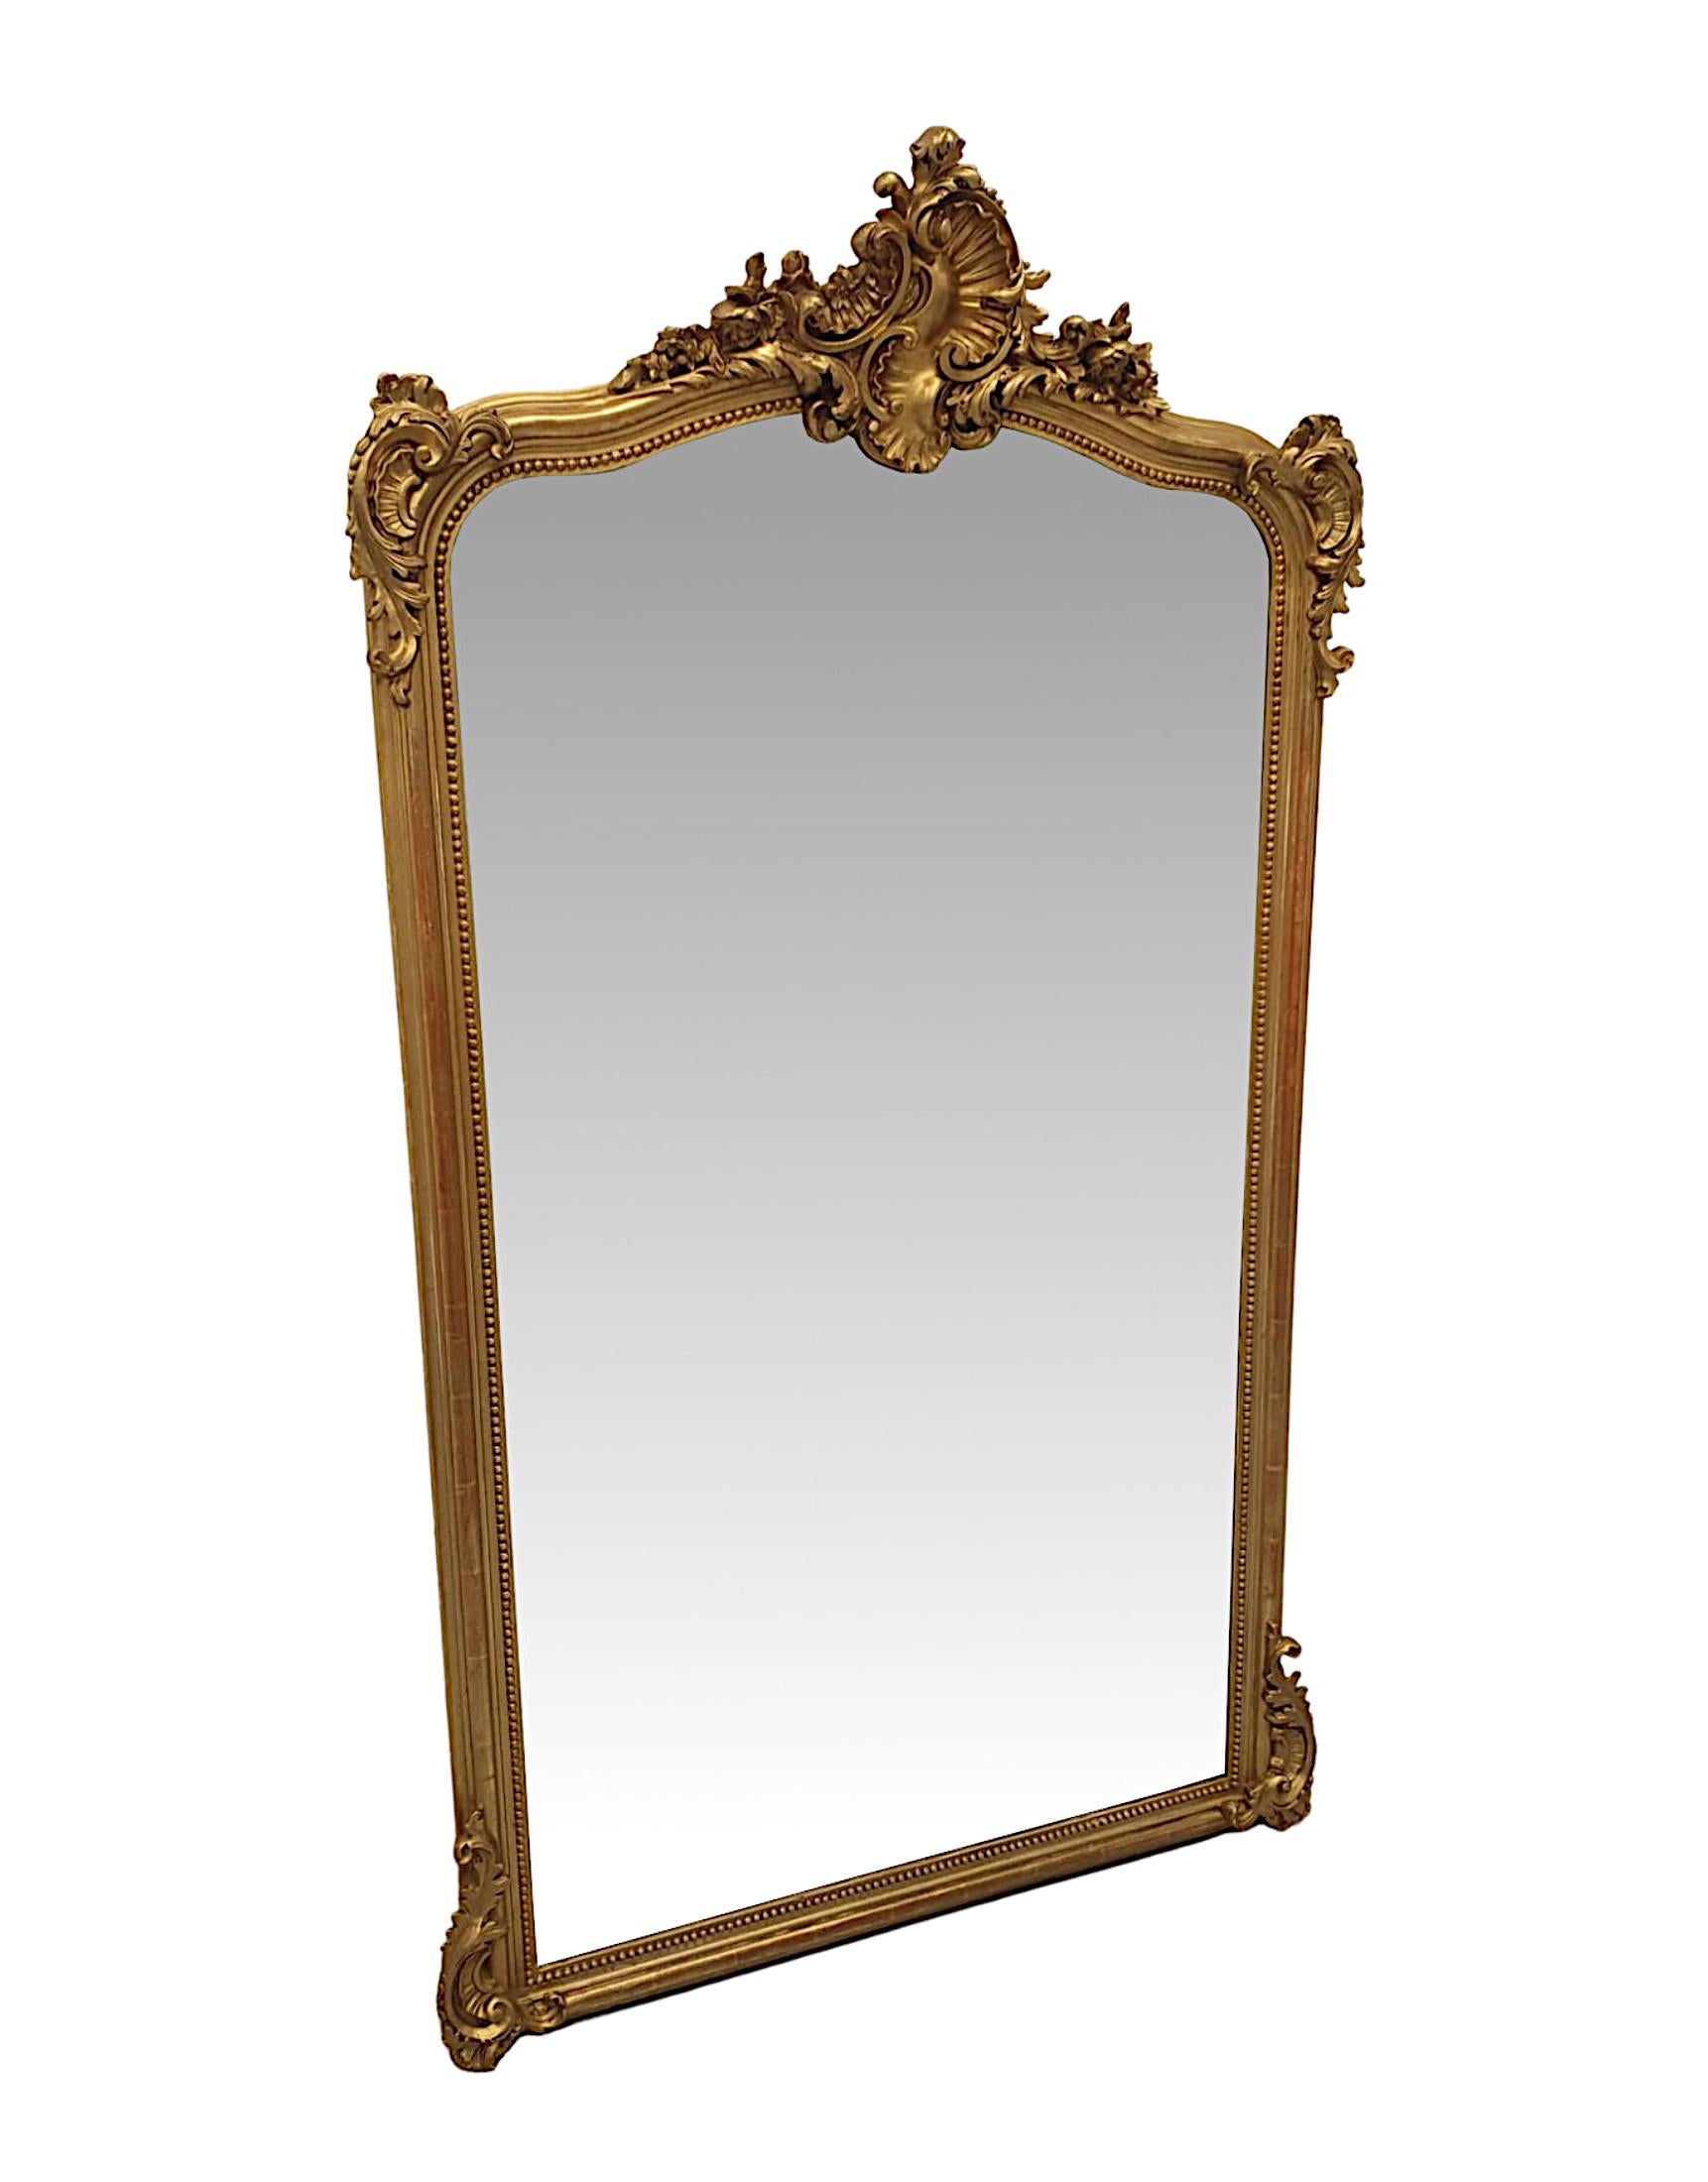 A fine 19th century giltwood overmantle or hall mirror. The original bevelled mirror glass plate of shaped rectangular form is set within a stunningly hand carved and moulded giltwood frame with beaded border. Surmounted with an elegantly ornate,